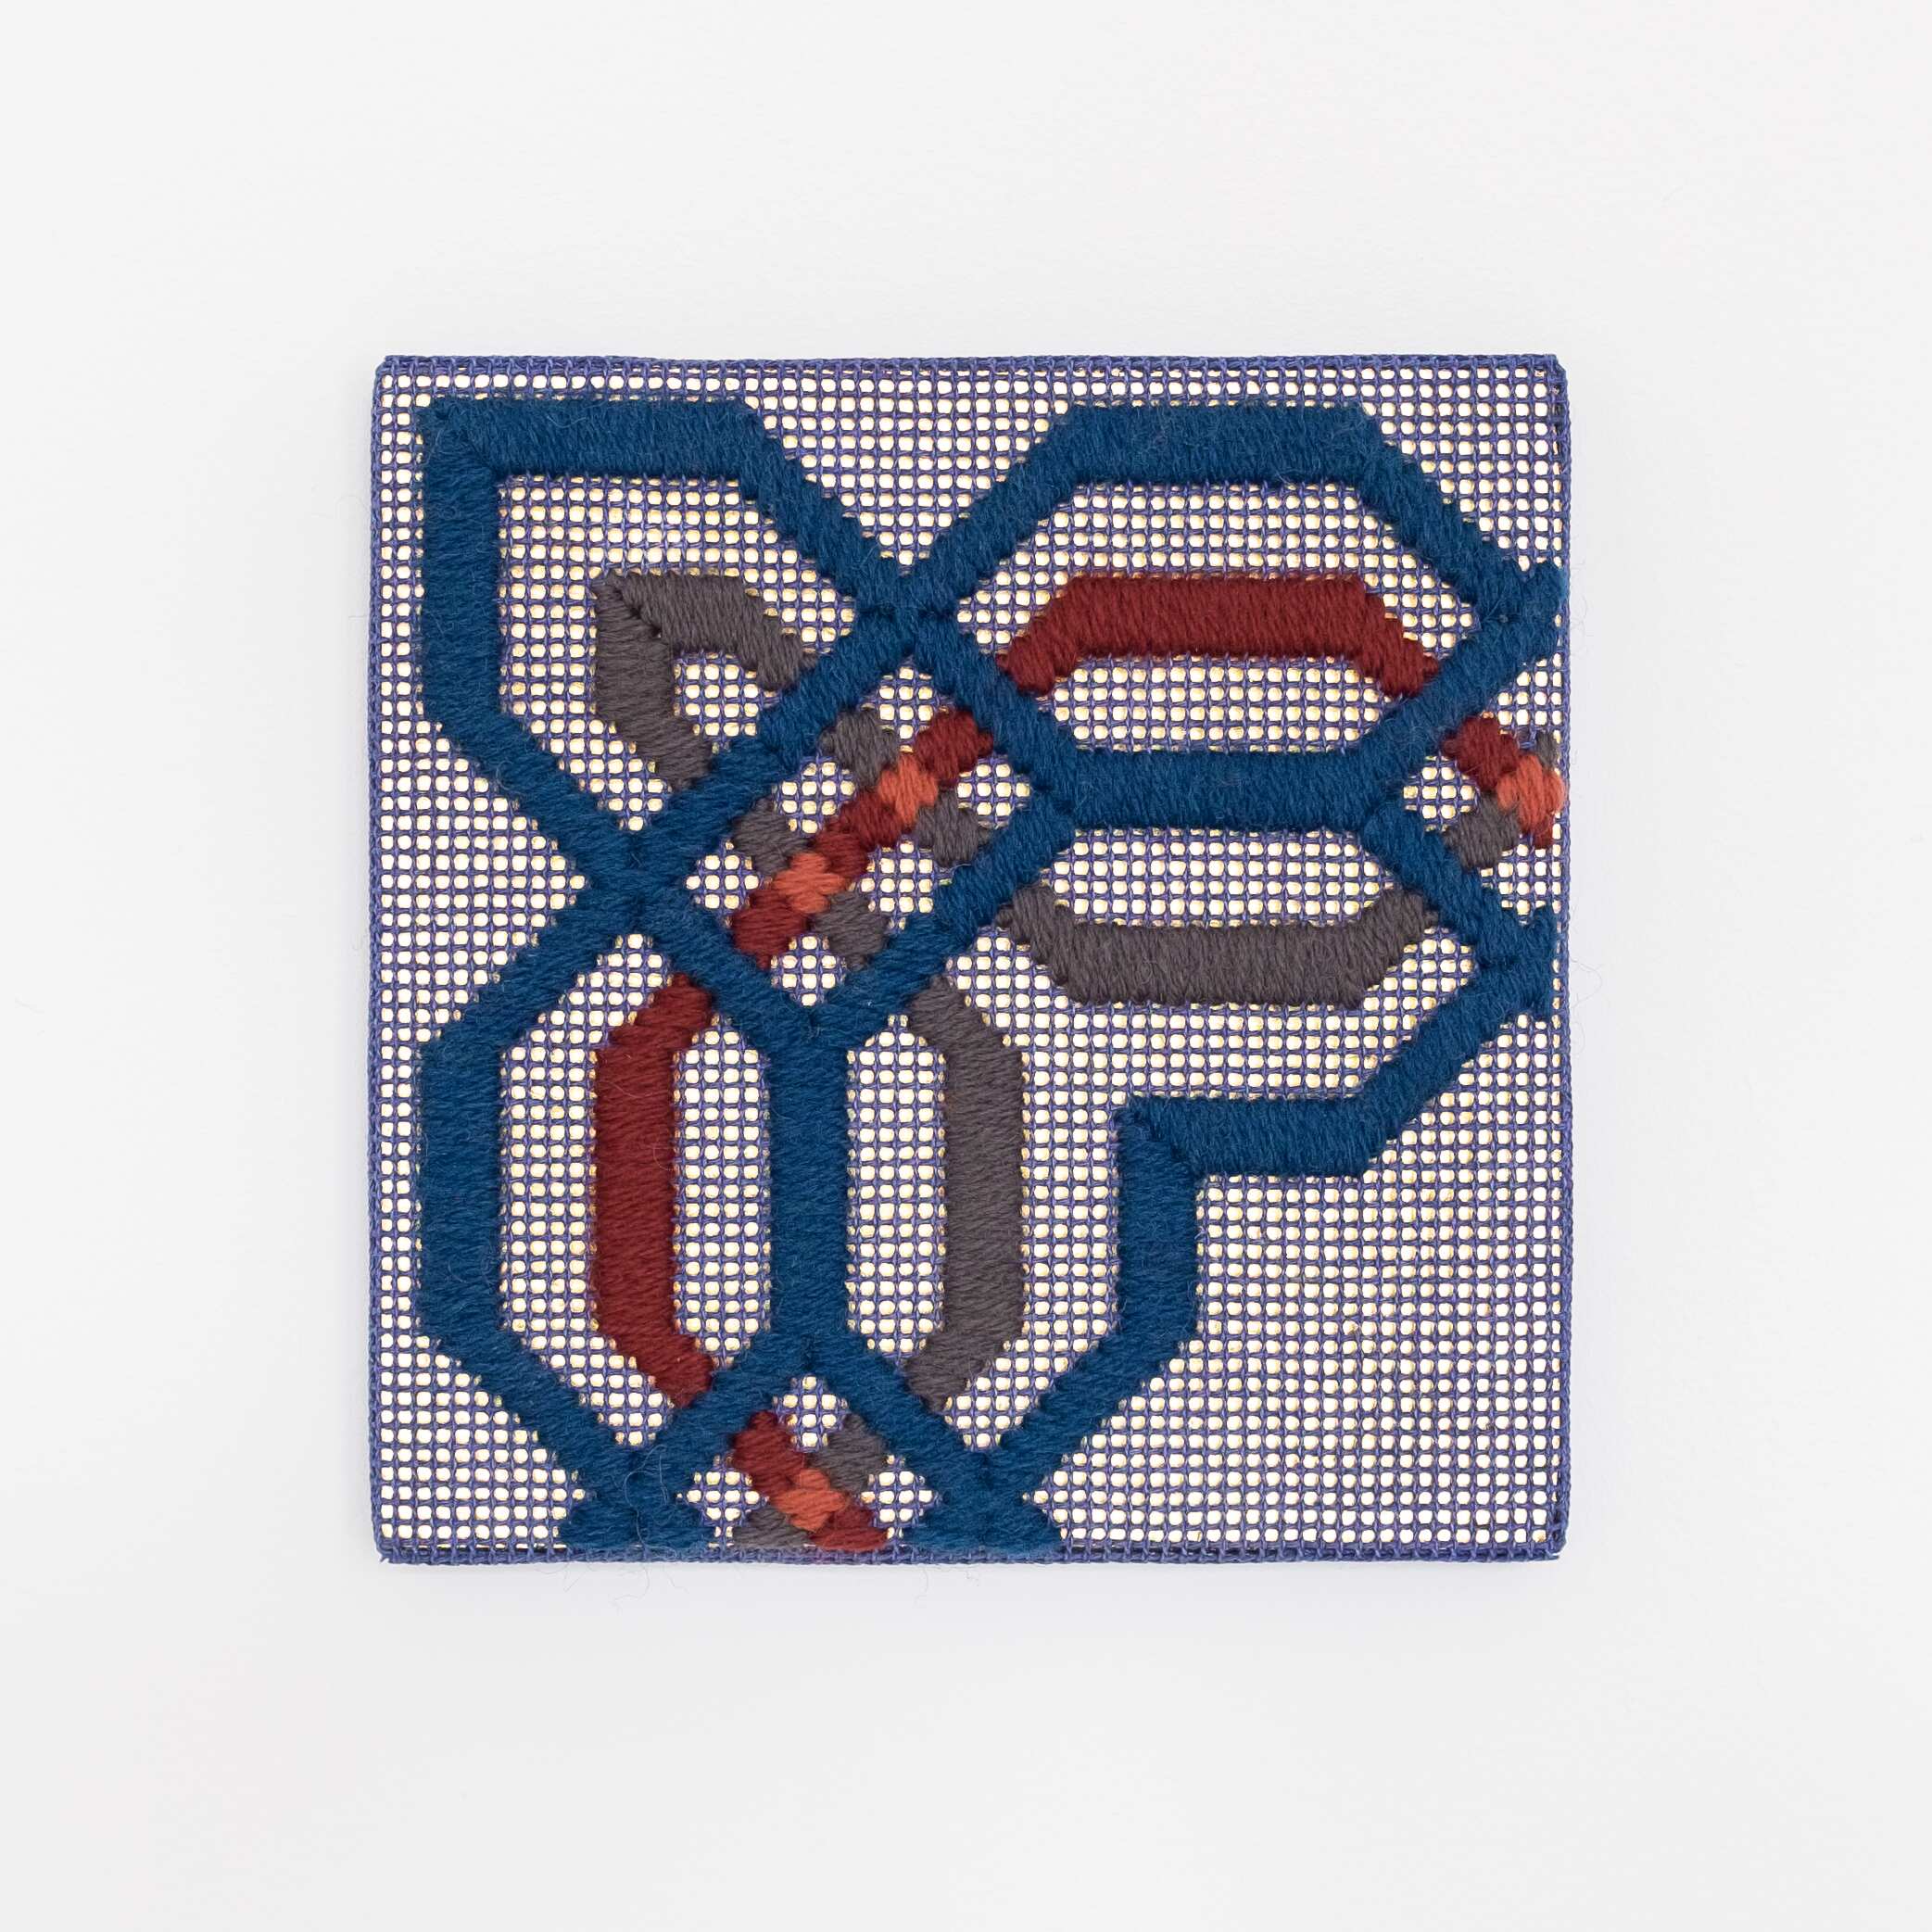 Border fragment [blue-grey-red on blue], Hand-embroidered wool thread and acrylic paint on canvas over gilded panel, 2021